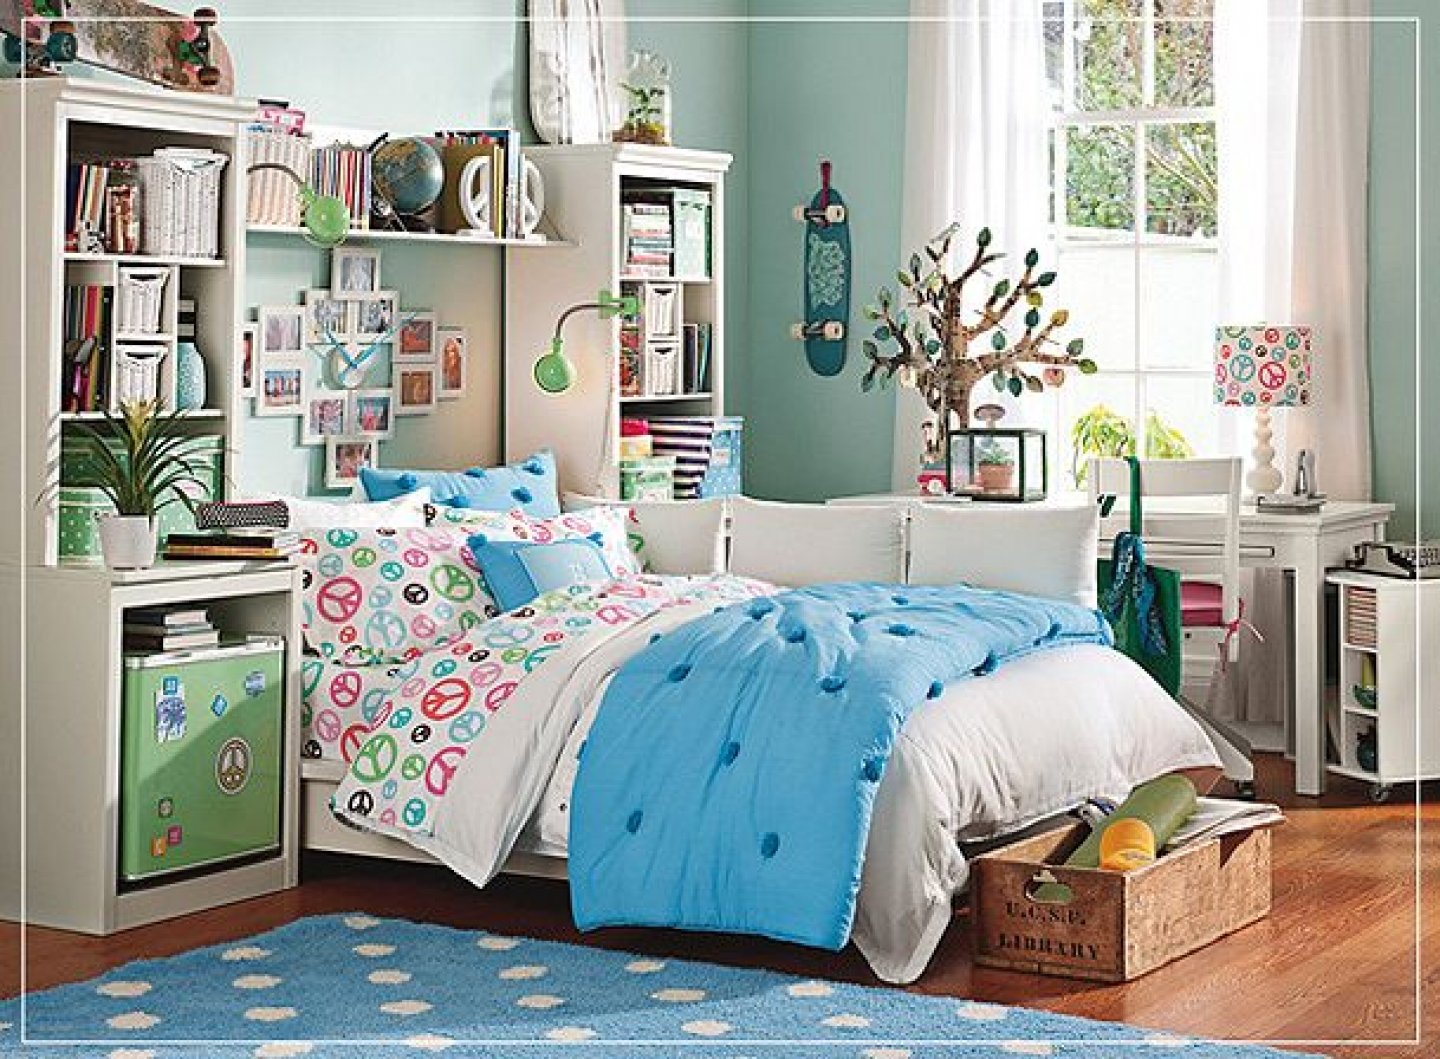 Bedroom Decor For Teenager